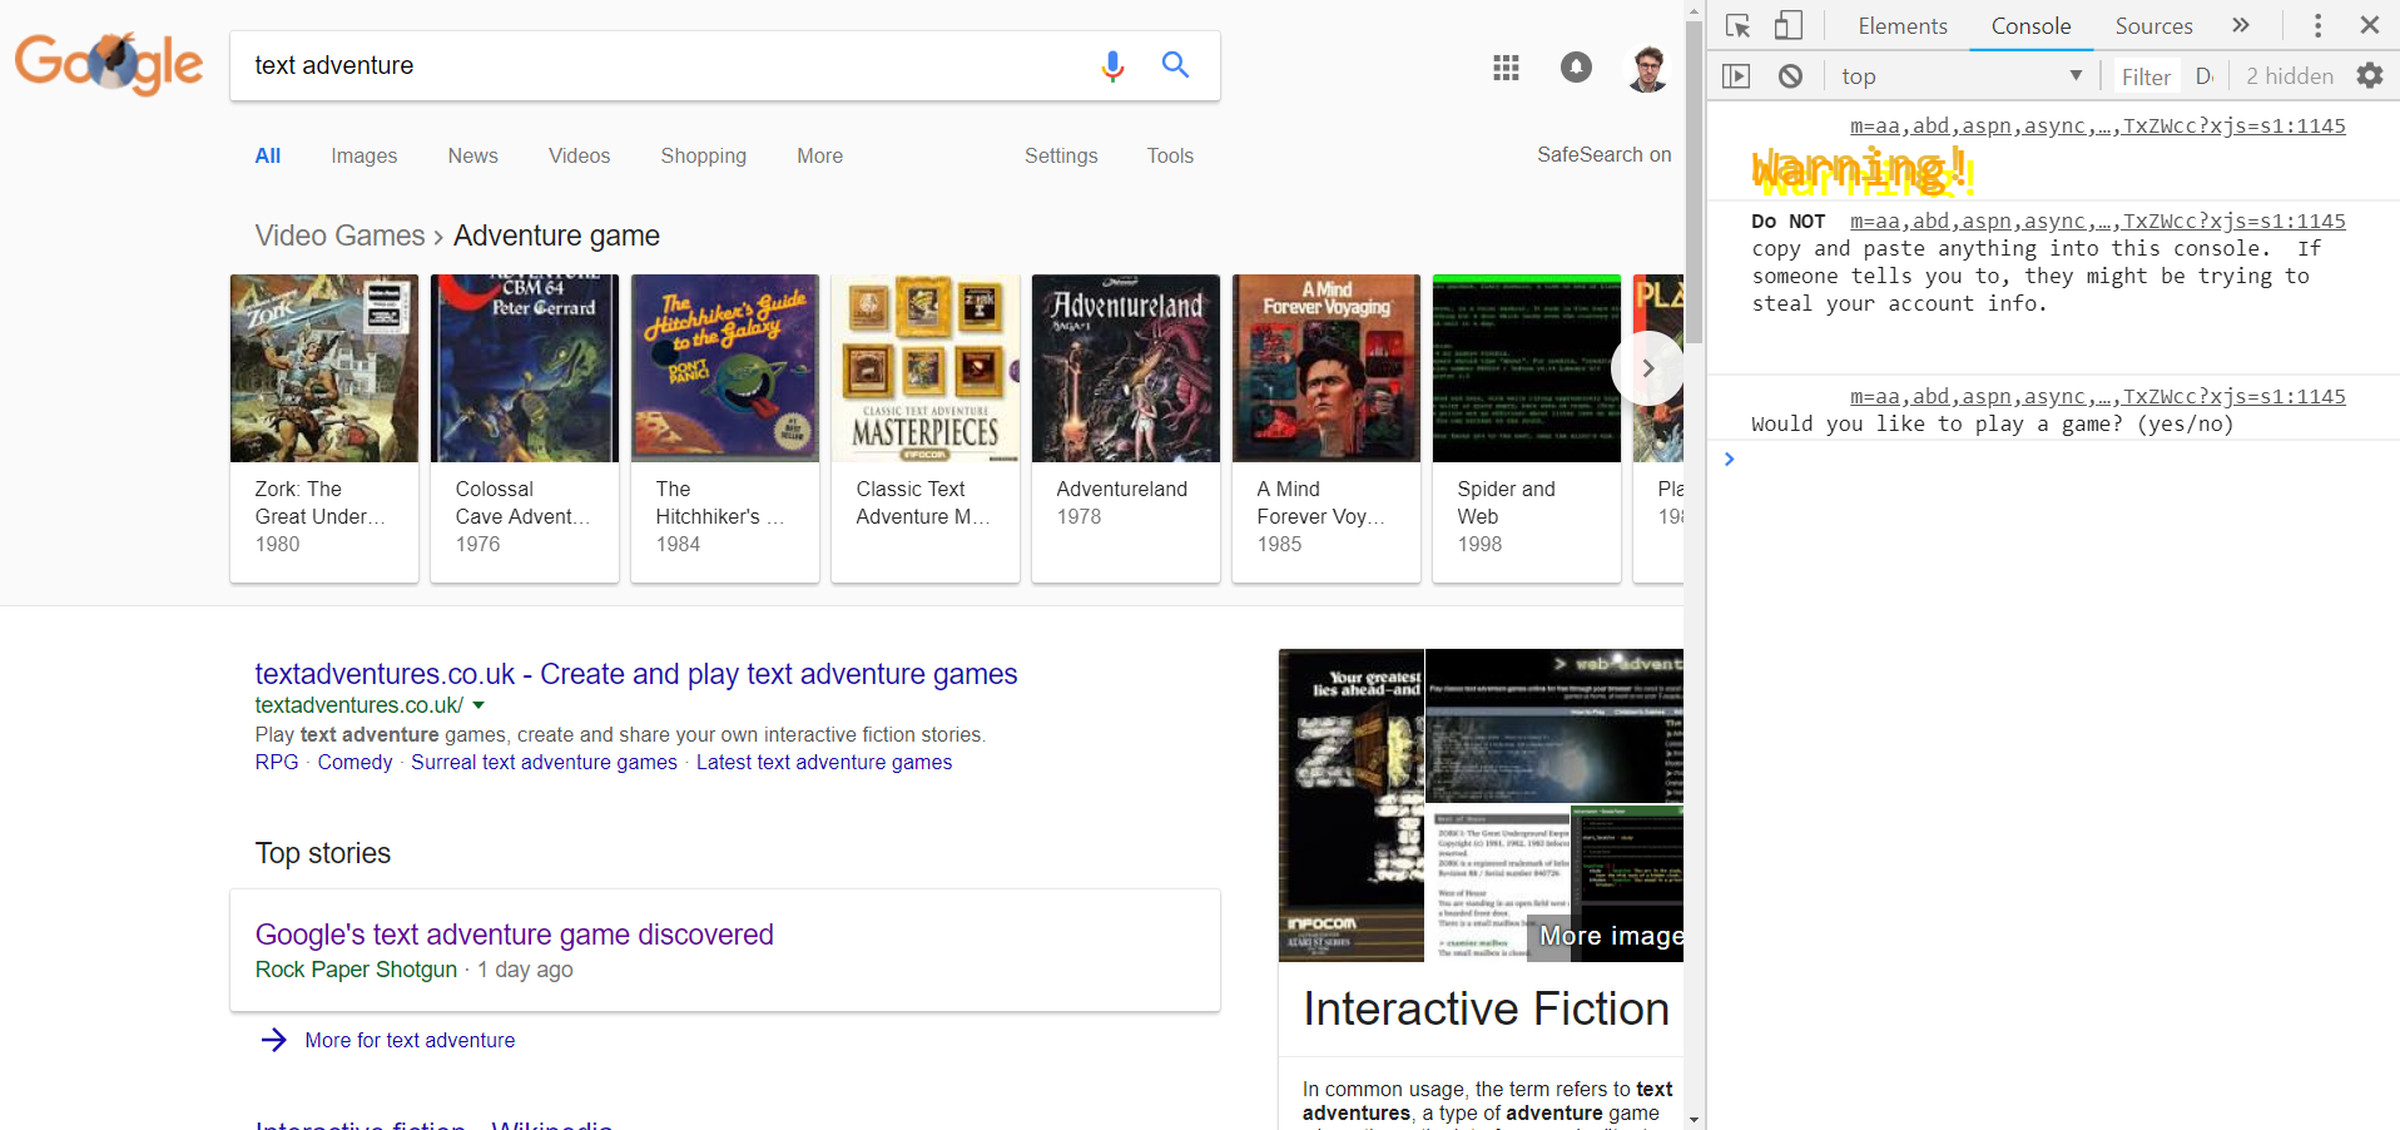 Bring up the developer console on the search results page and you’ll be asked, “Would you like to play a game?”